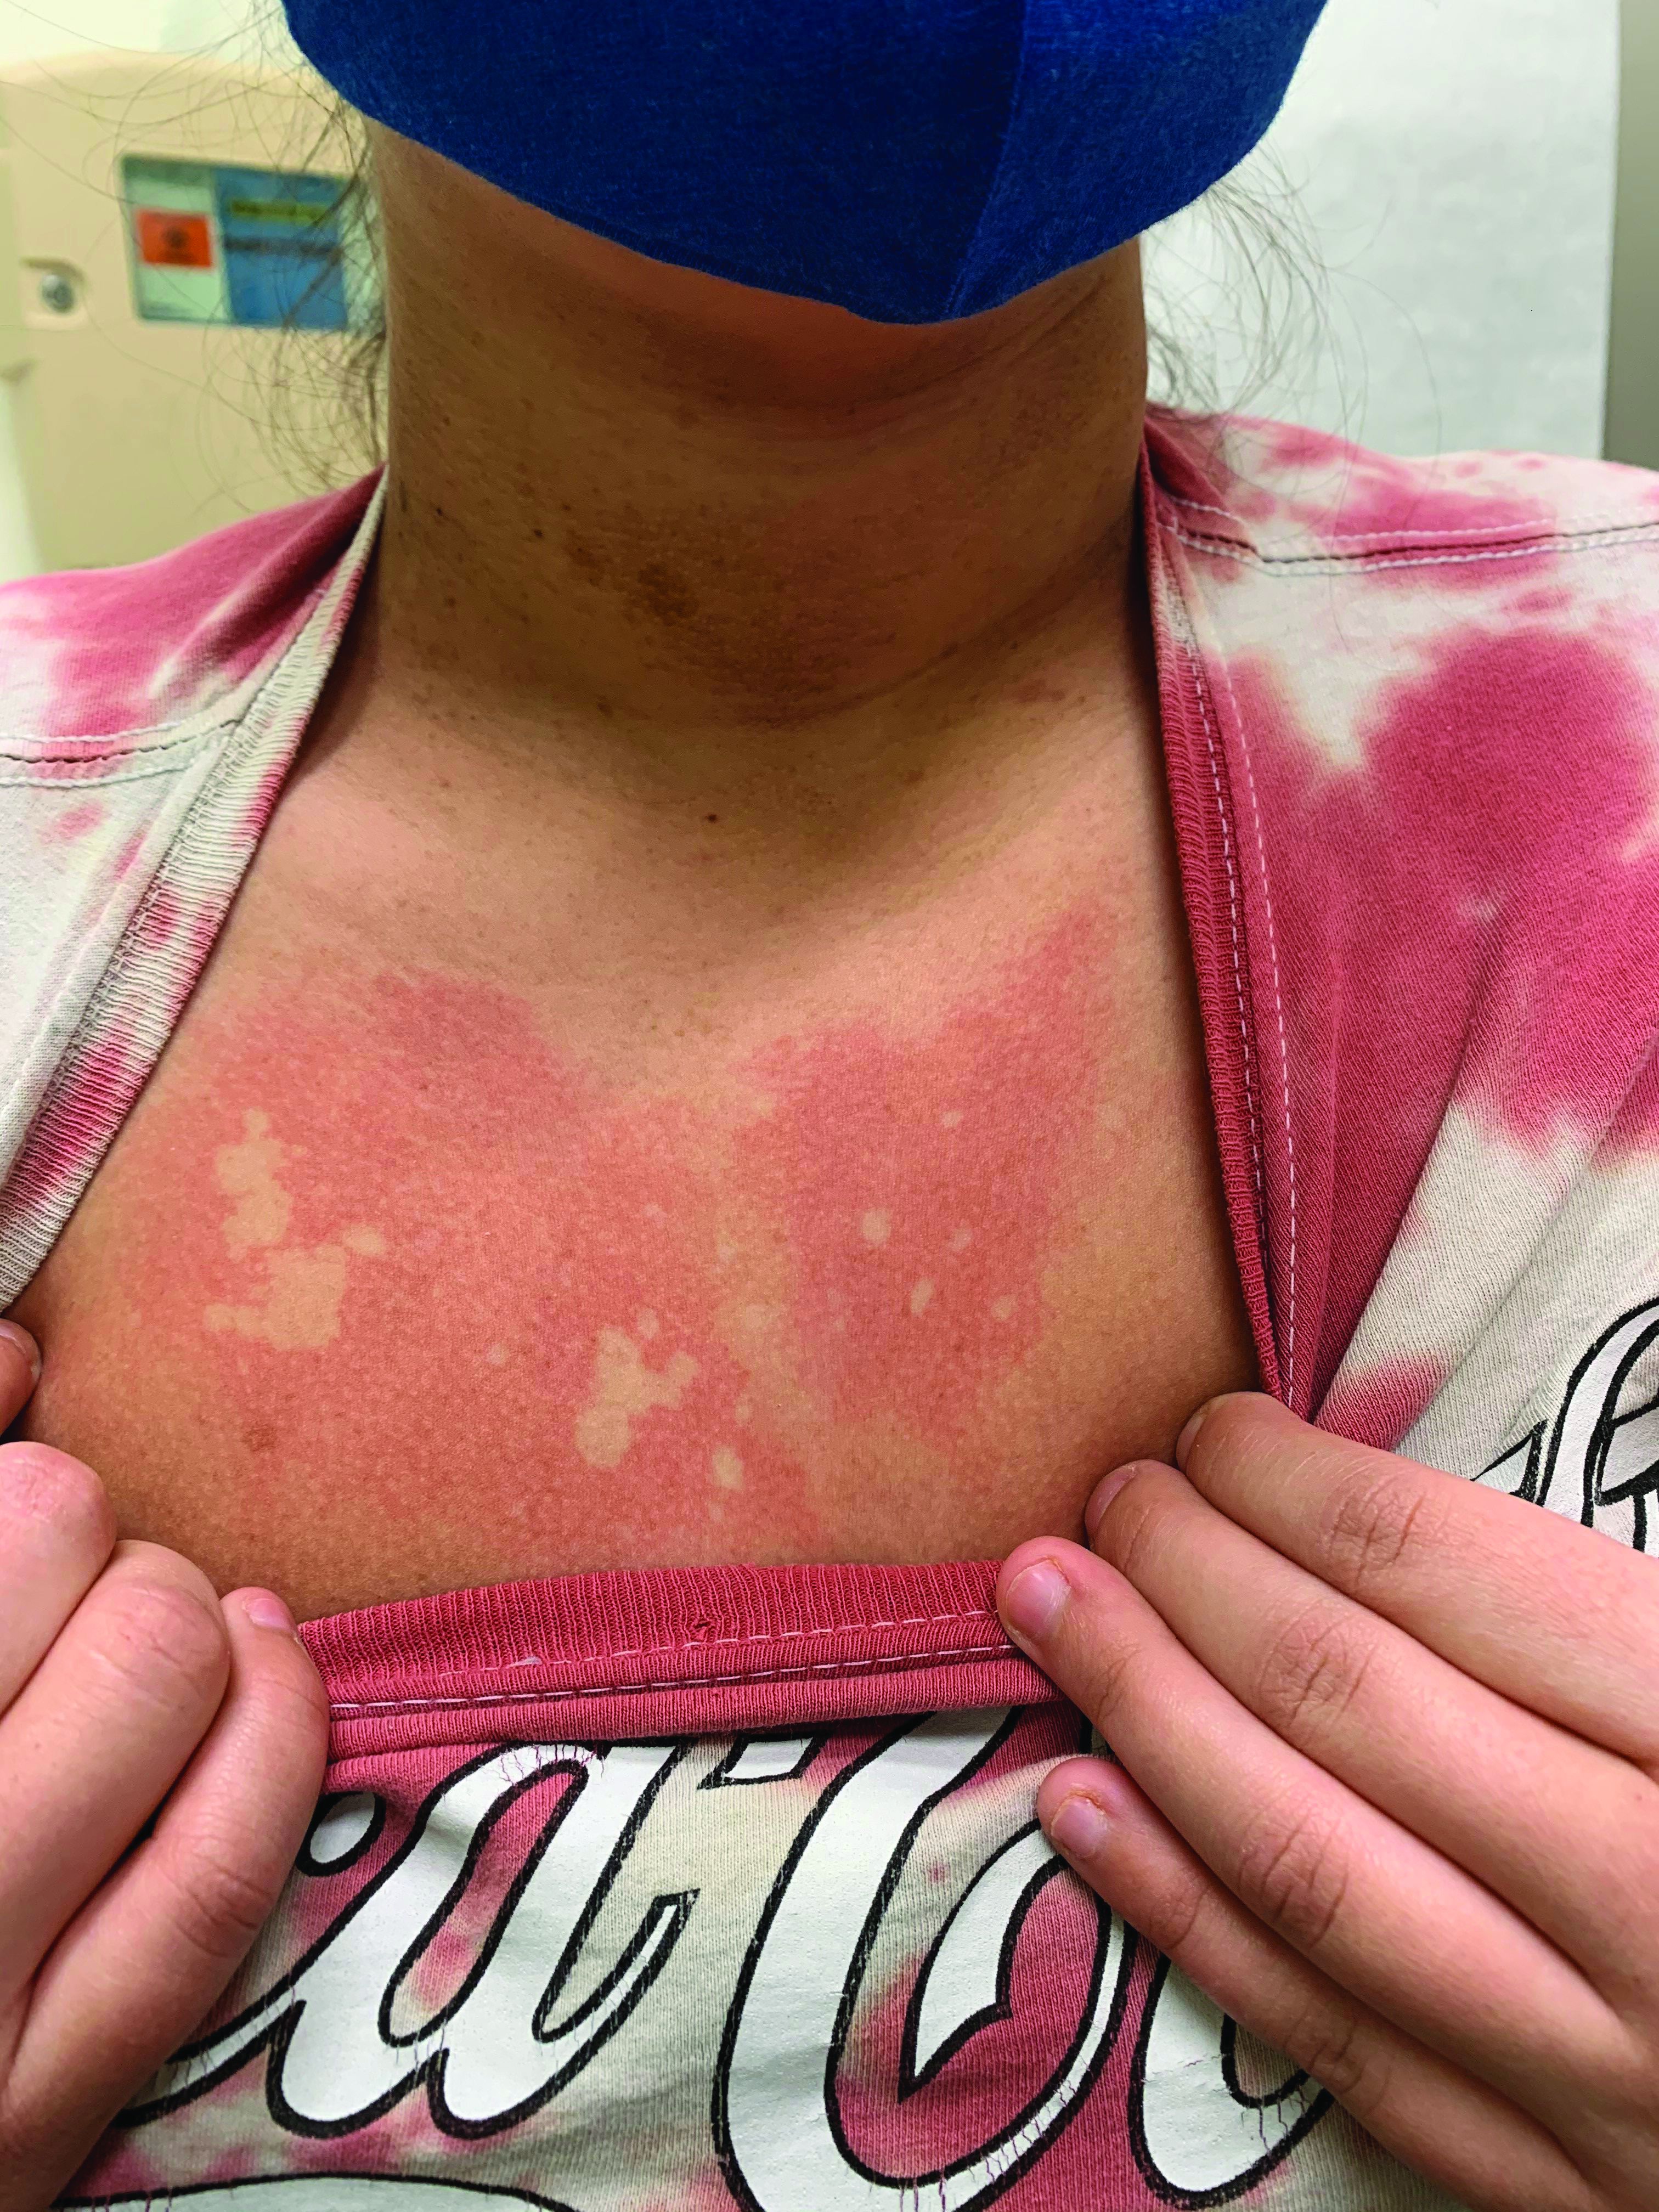 A girl presents with blotchy, slightly itchy spots on her chest, back